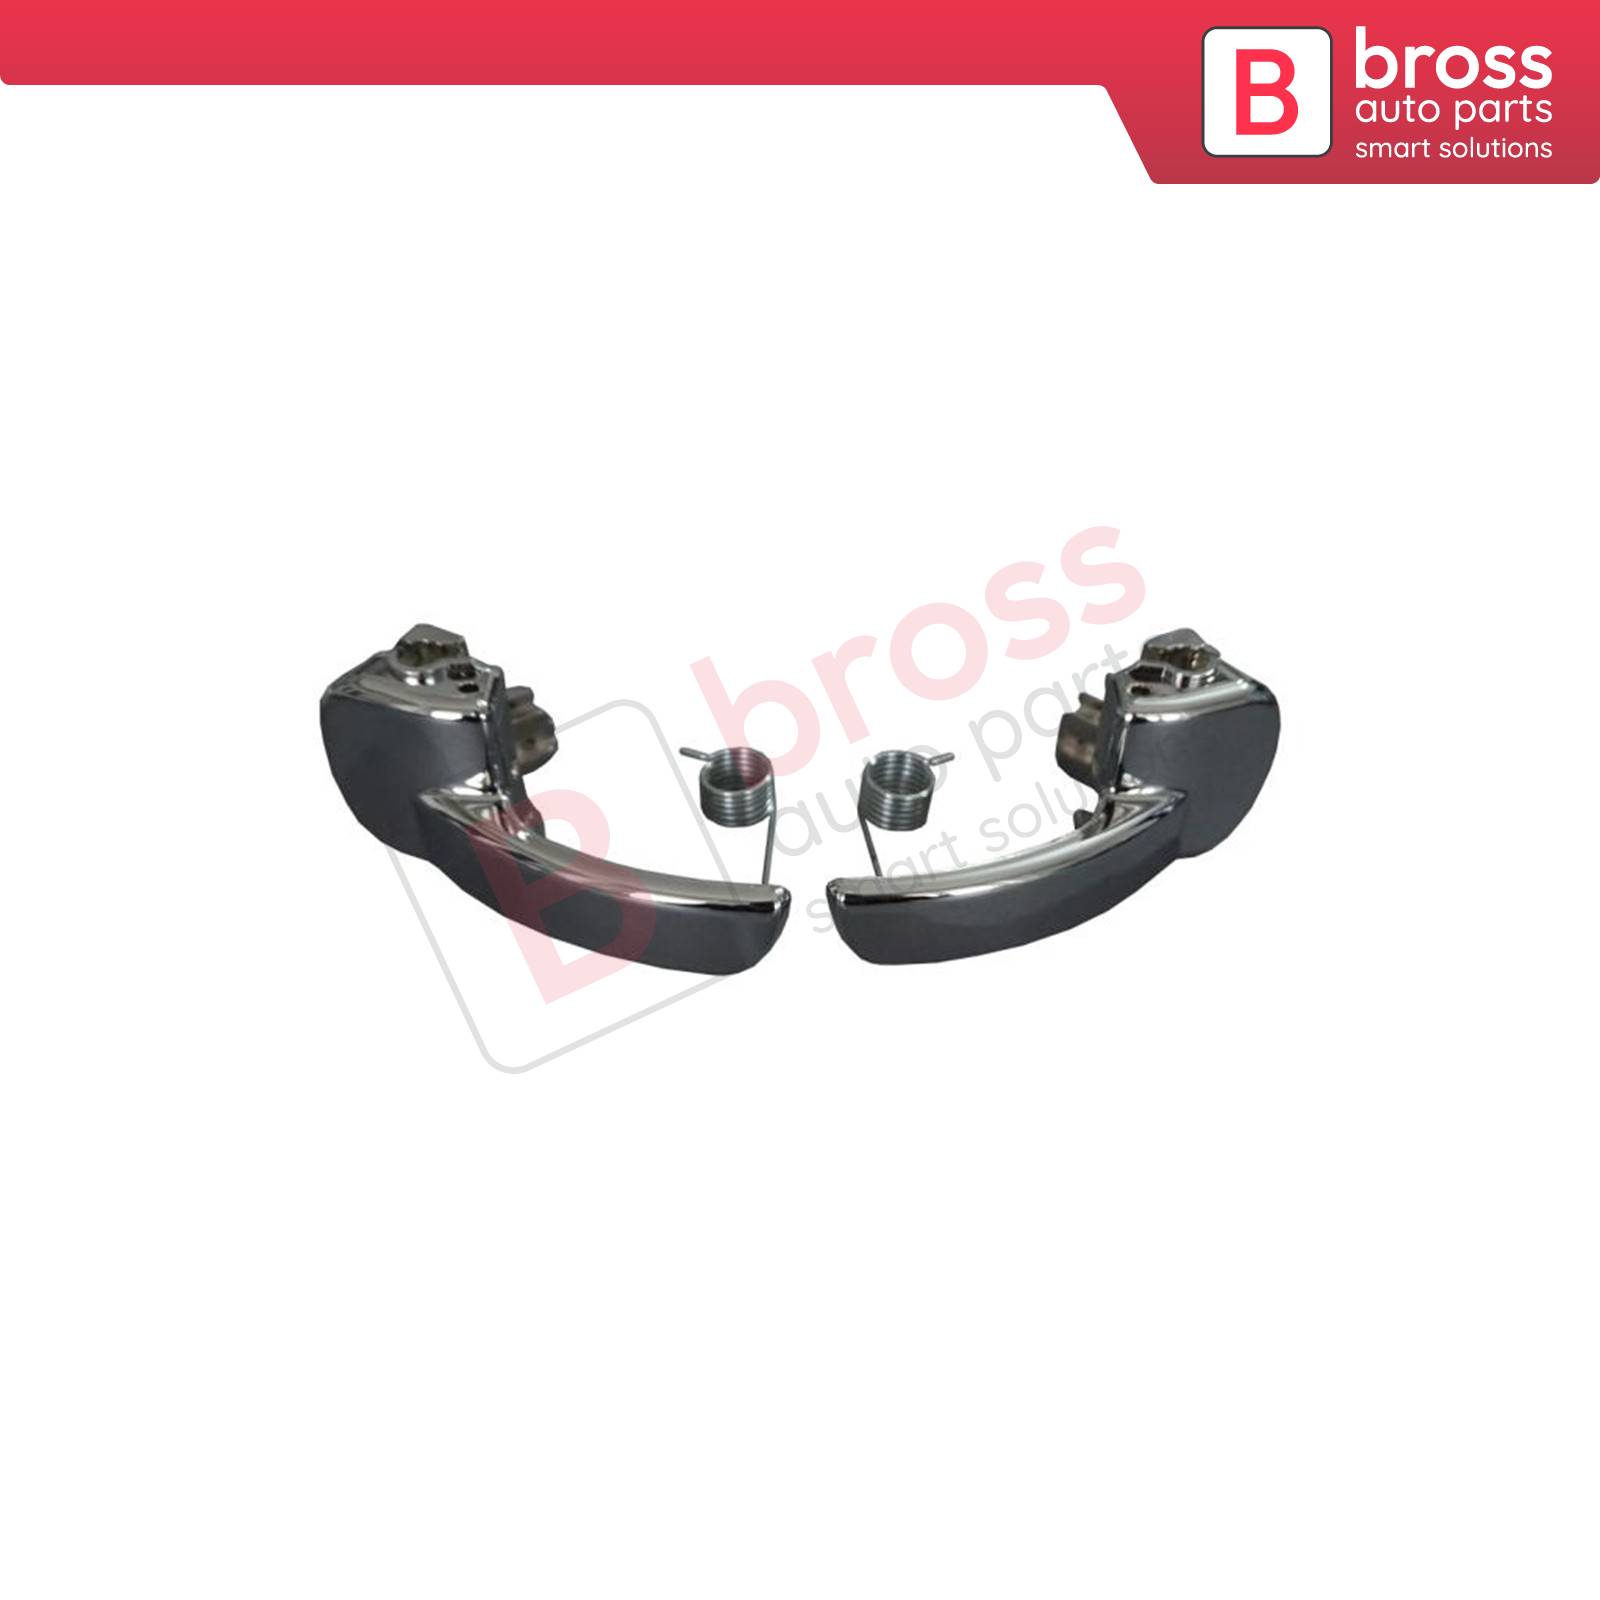 Bross Auto Parts LLC - BDP917 Interior Front or Rear Door Chrome Handle  Right and Left Side For Nissan Qashqai 2007-2013 J10 Dualis 80670JD00E  80671JD00E